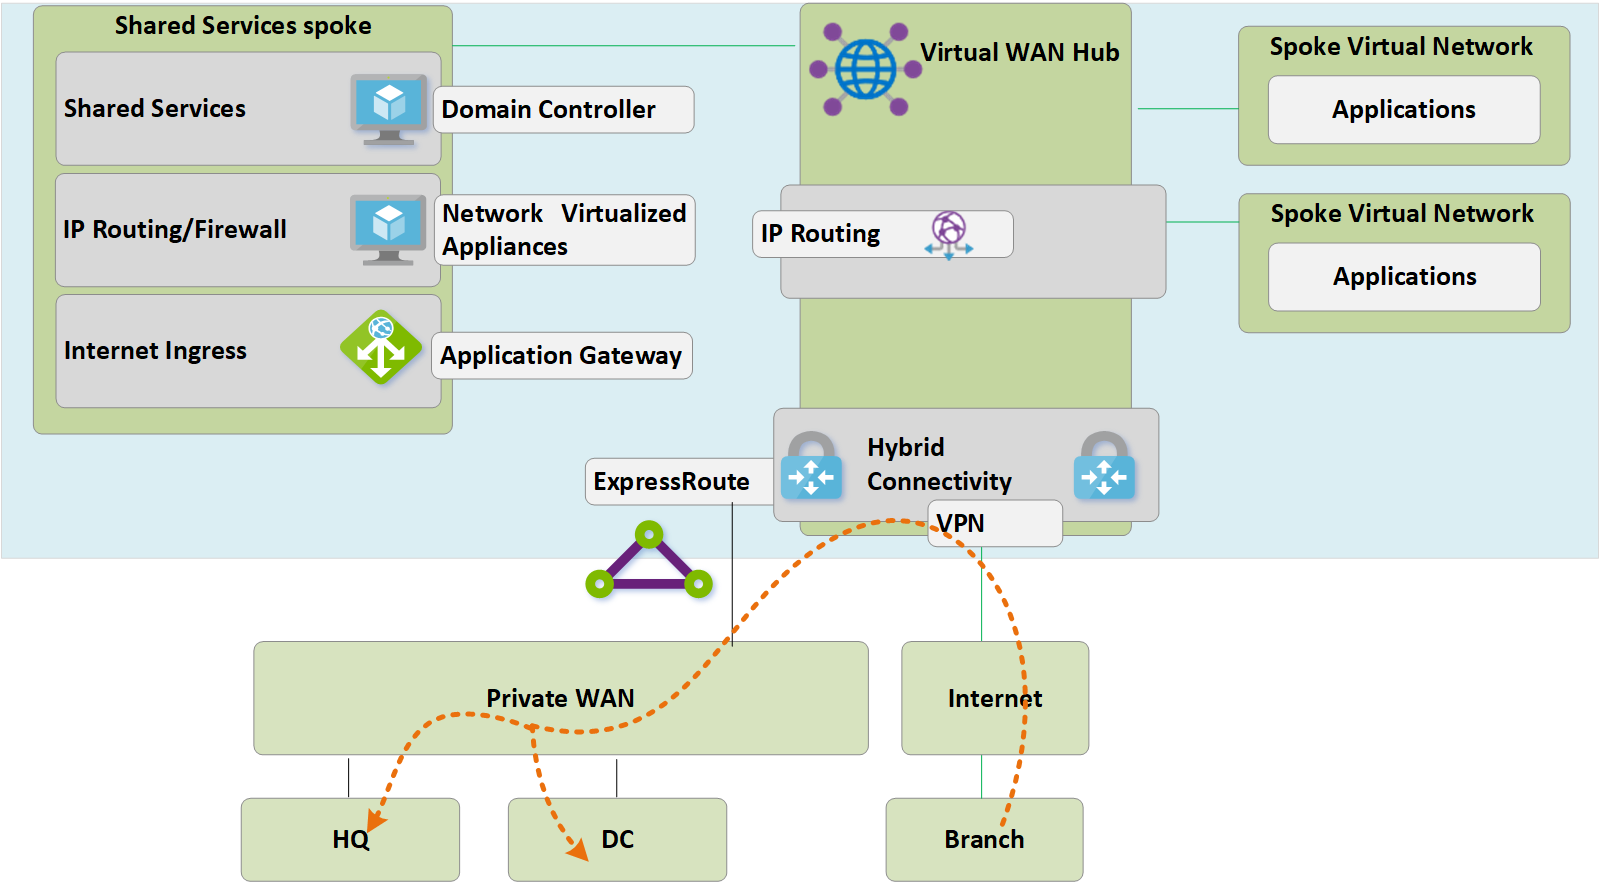 Optimize on-premises connectivity to fully utilize Virtual WAN